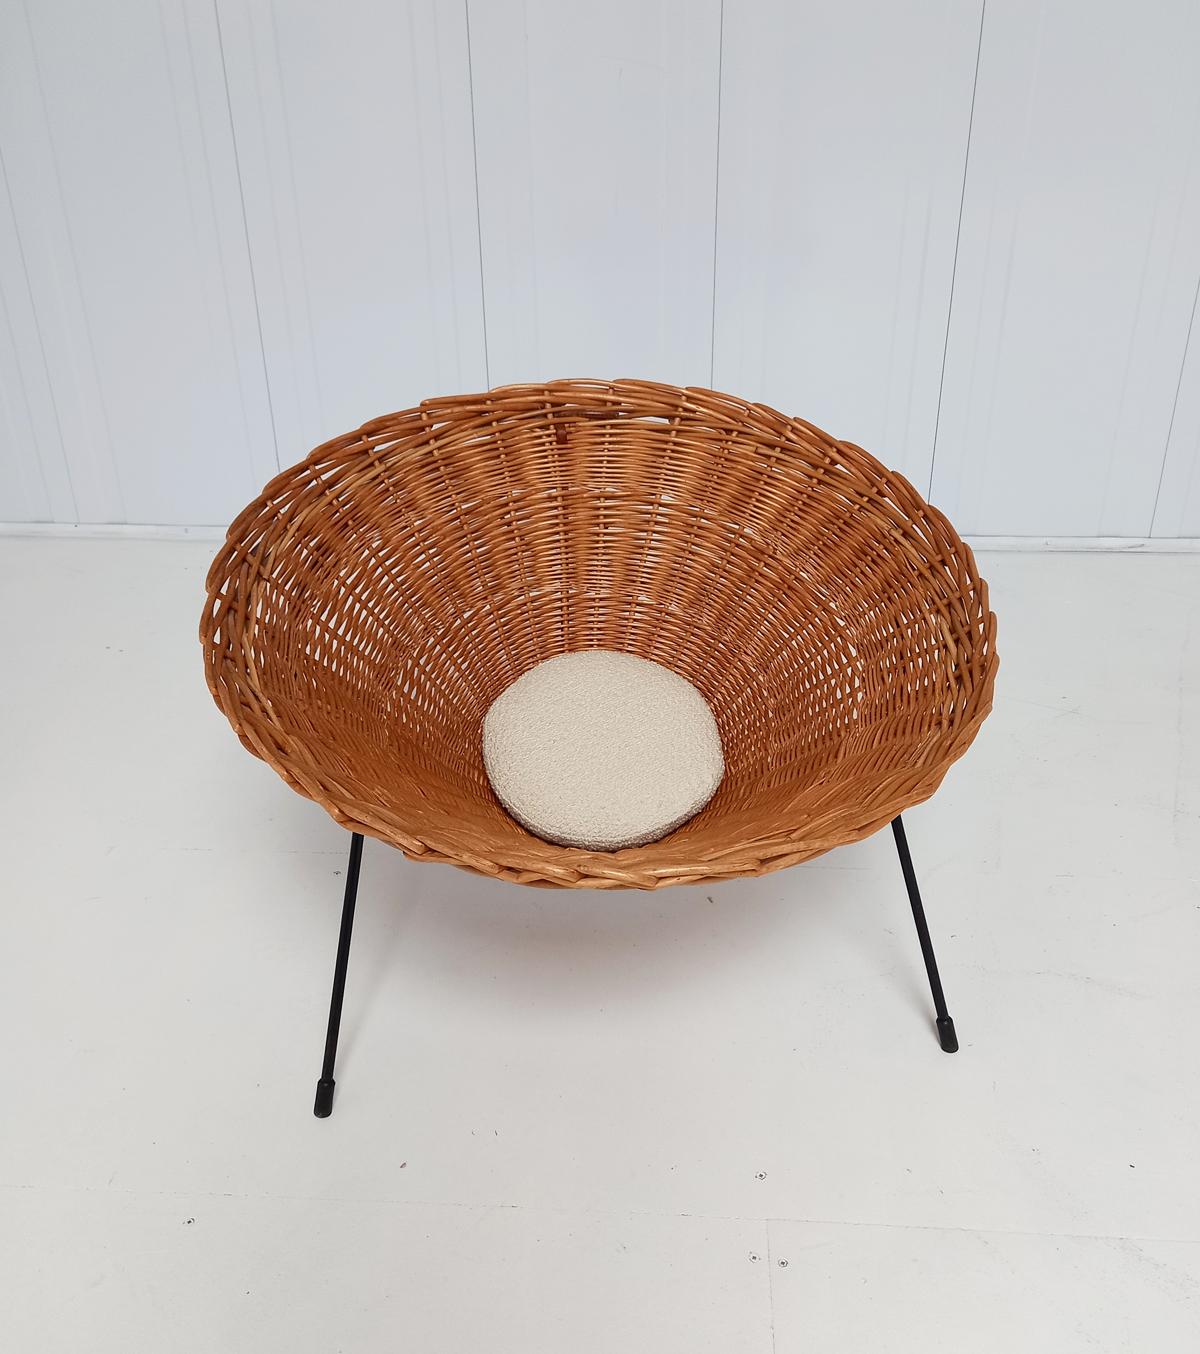 A Terence Conran C8 cone chair, Conran Furniture, England, 1954.
Dating from 1954 this is an early example. We added a cushion that can be easily removed.
The large basket weave sits on a tripod steel rod frame.
In good condition no breakage in